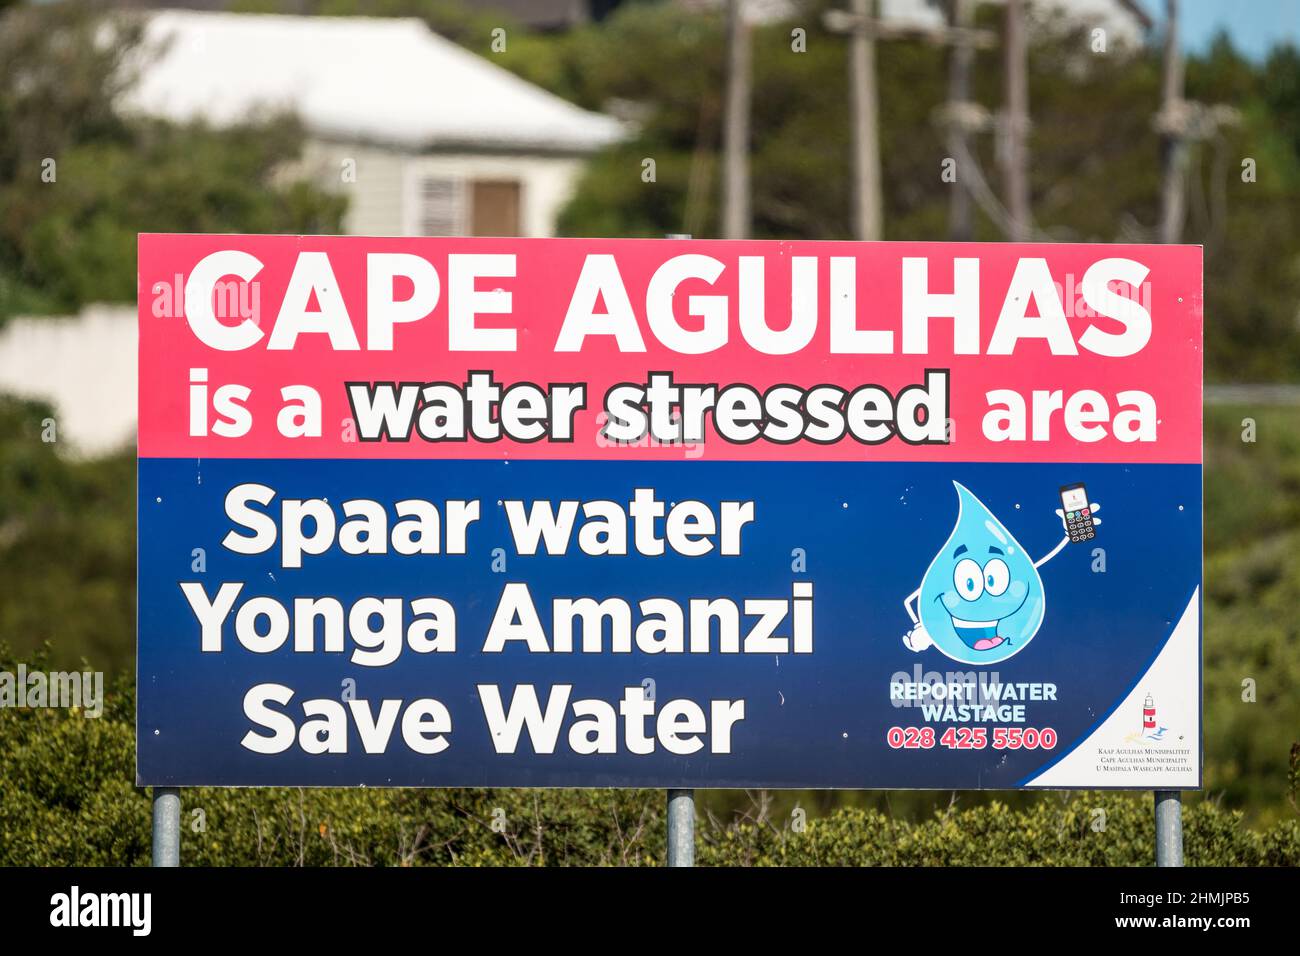 Save water signboard concept climate change and drought in South Africa as a public awareness campaign in Cape Agulhas Stock Photo